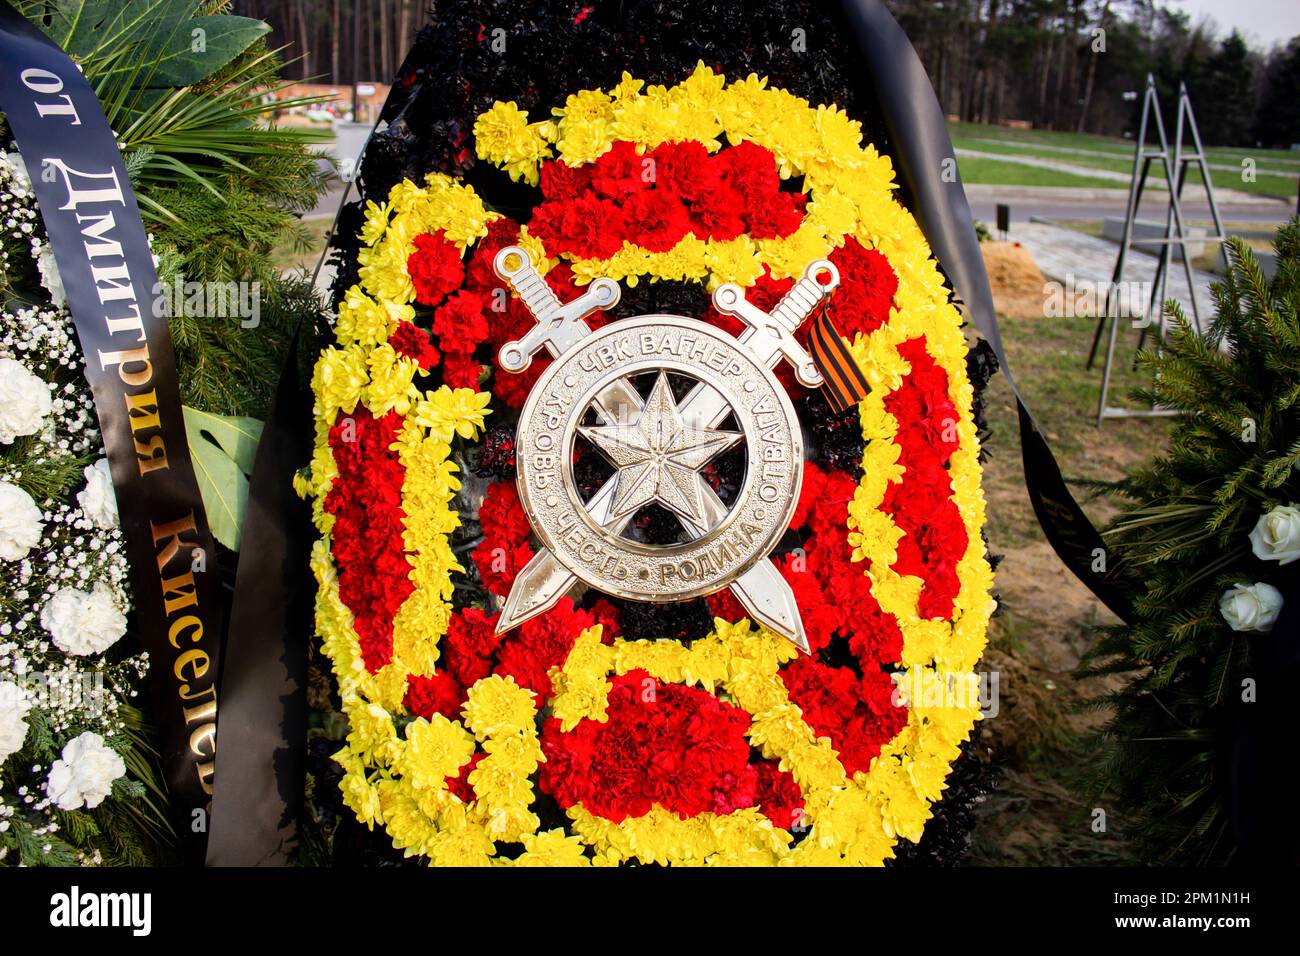 A funeral wreath is left at the grave of Vladlen Tatarsky at Troyekurovskoye cemetery in Moscow. Maxim Fomin better known by his pen-name Vladlen Tatarsky was a convicted criminal who escaped from prison and made a name for himself as a Ukrainian-born Russian military blogger and a participant in the war between Russian and Ukraine. He was active as a propagandist for the Russian side in the war until he was murdered in a terrorist act in St. Petersburg on April 2, 2023. 26-year-old woman named Darya Trepova was arrested for the bombing that had killed Tatarsky and injured dozens of others. Stock Photo